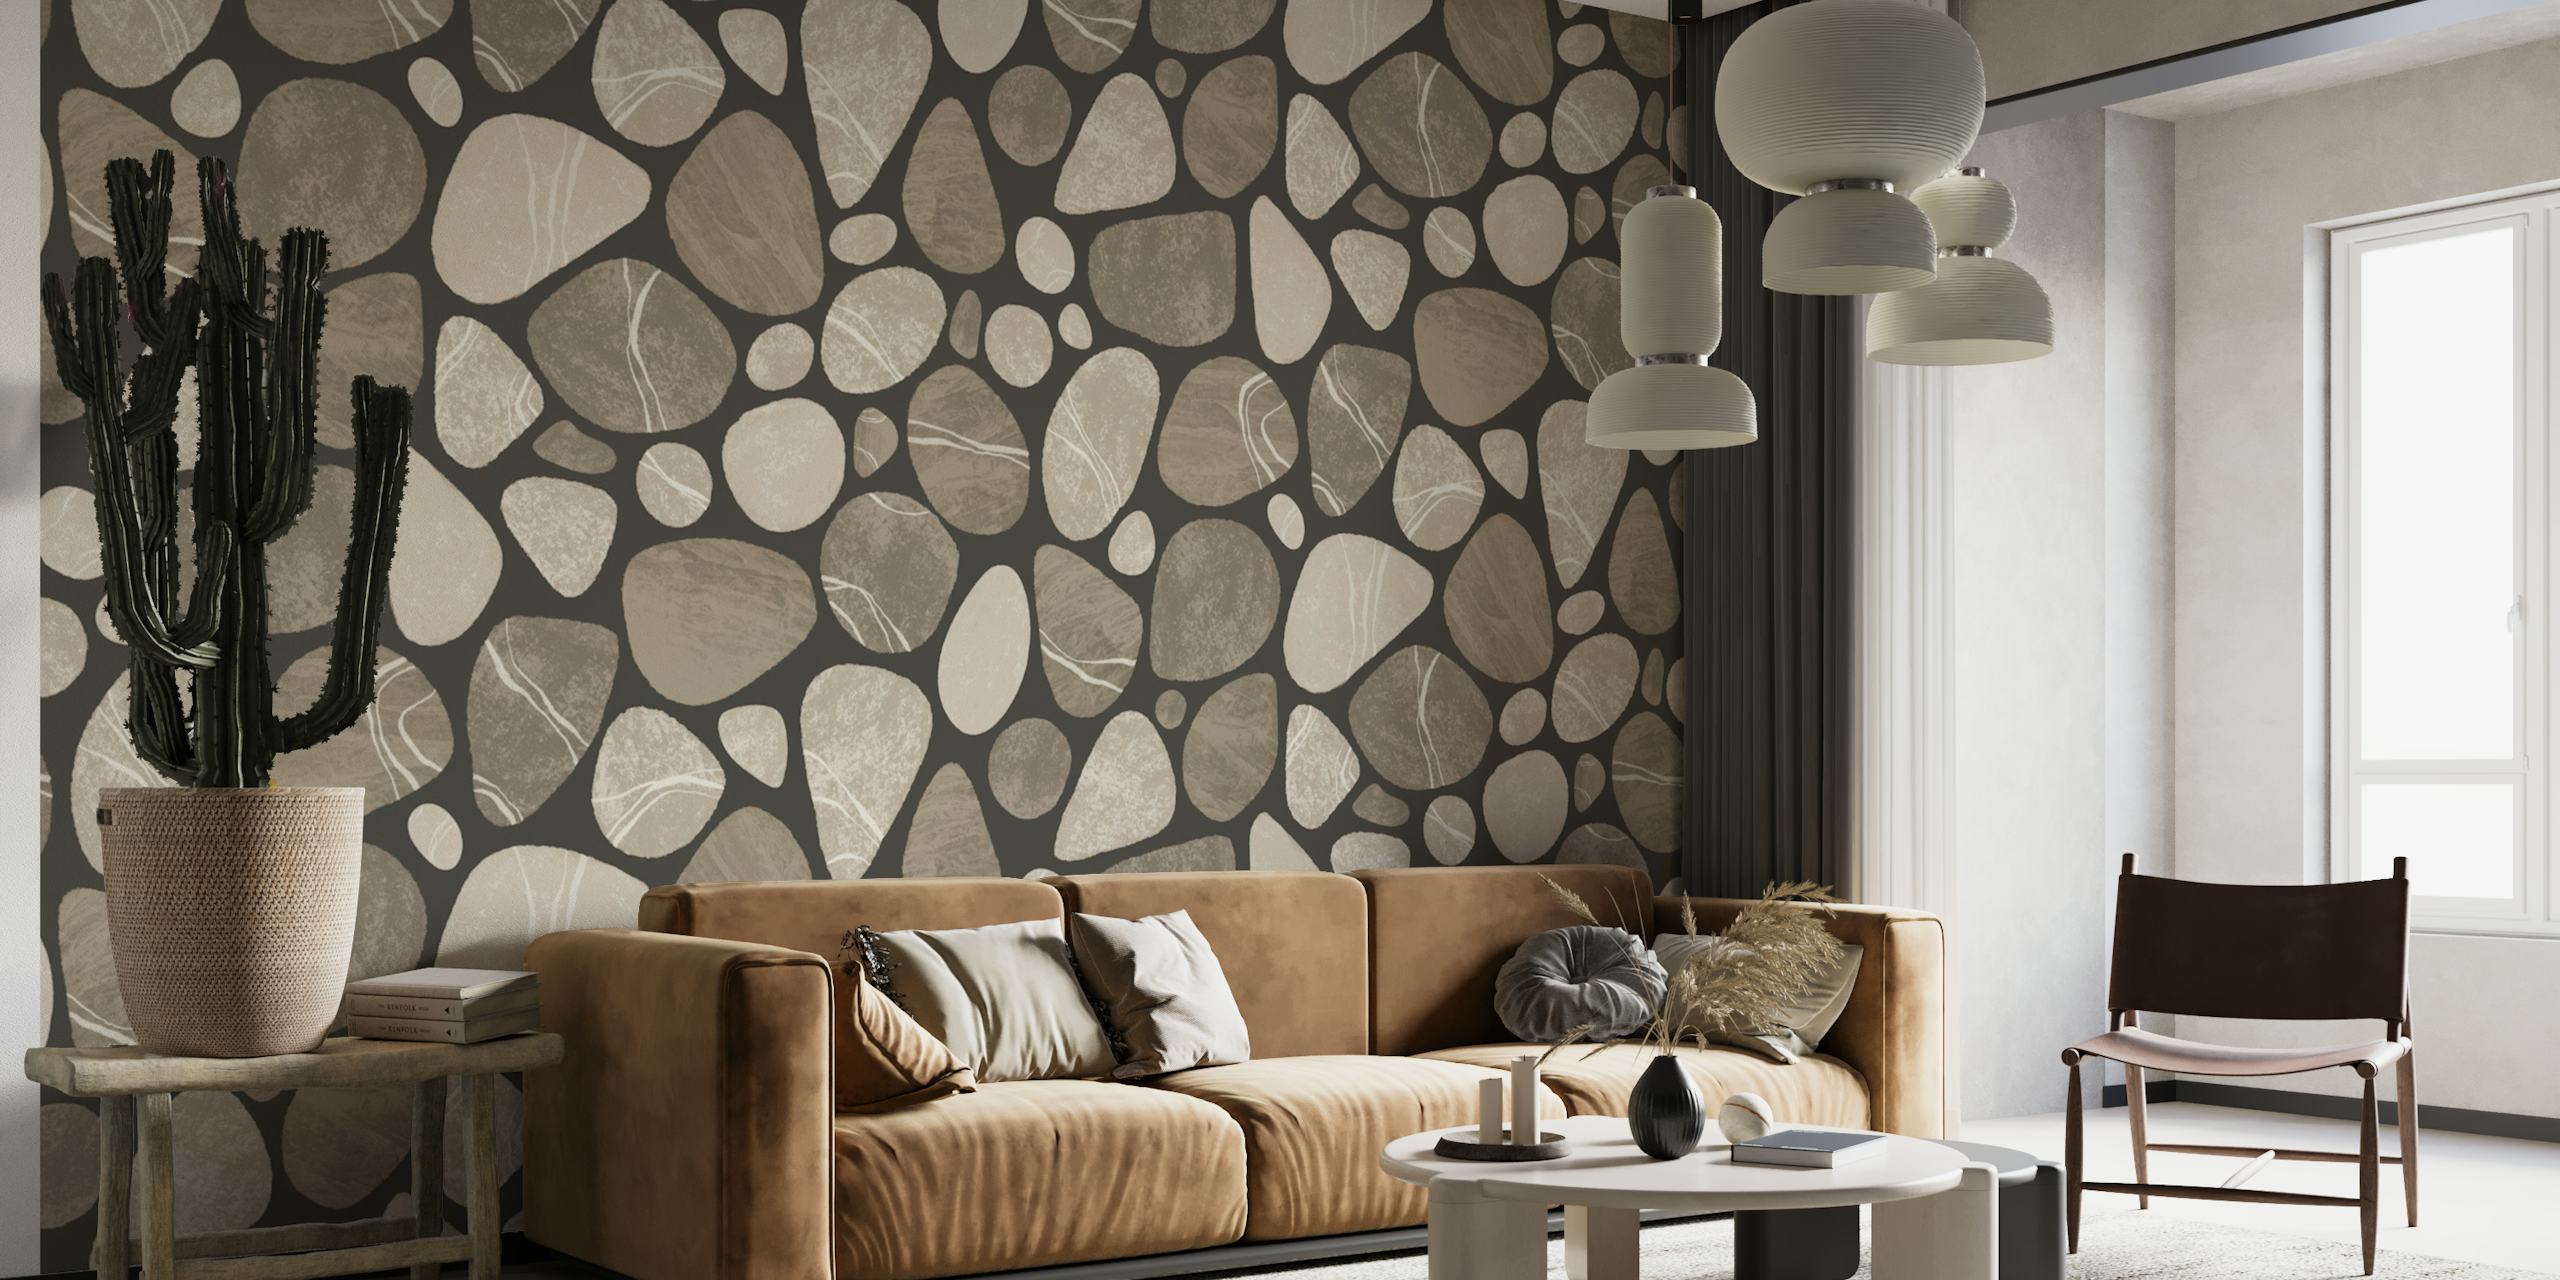 Pebble Serenity Stone Pattern Beauty Of Nature In Neutral Brown Beige Colors ταπετσαρία